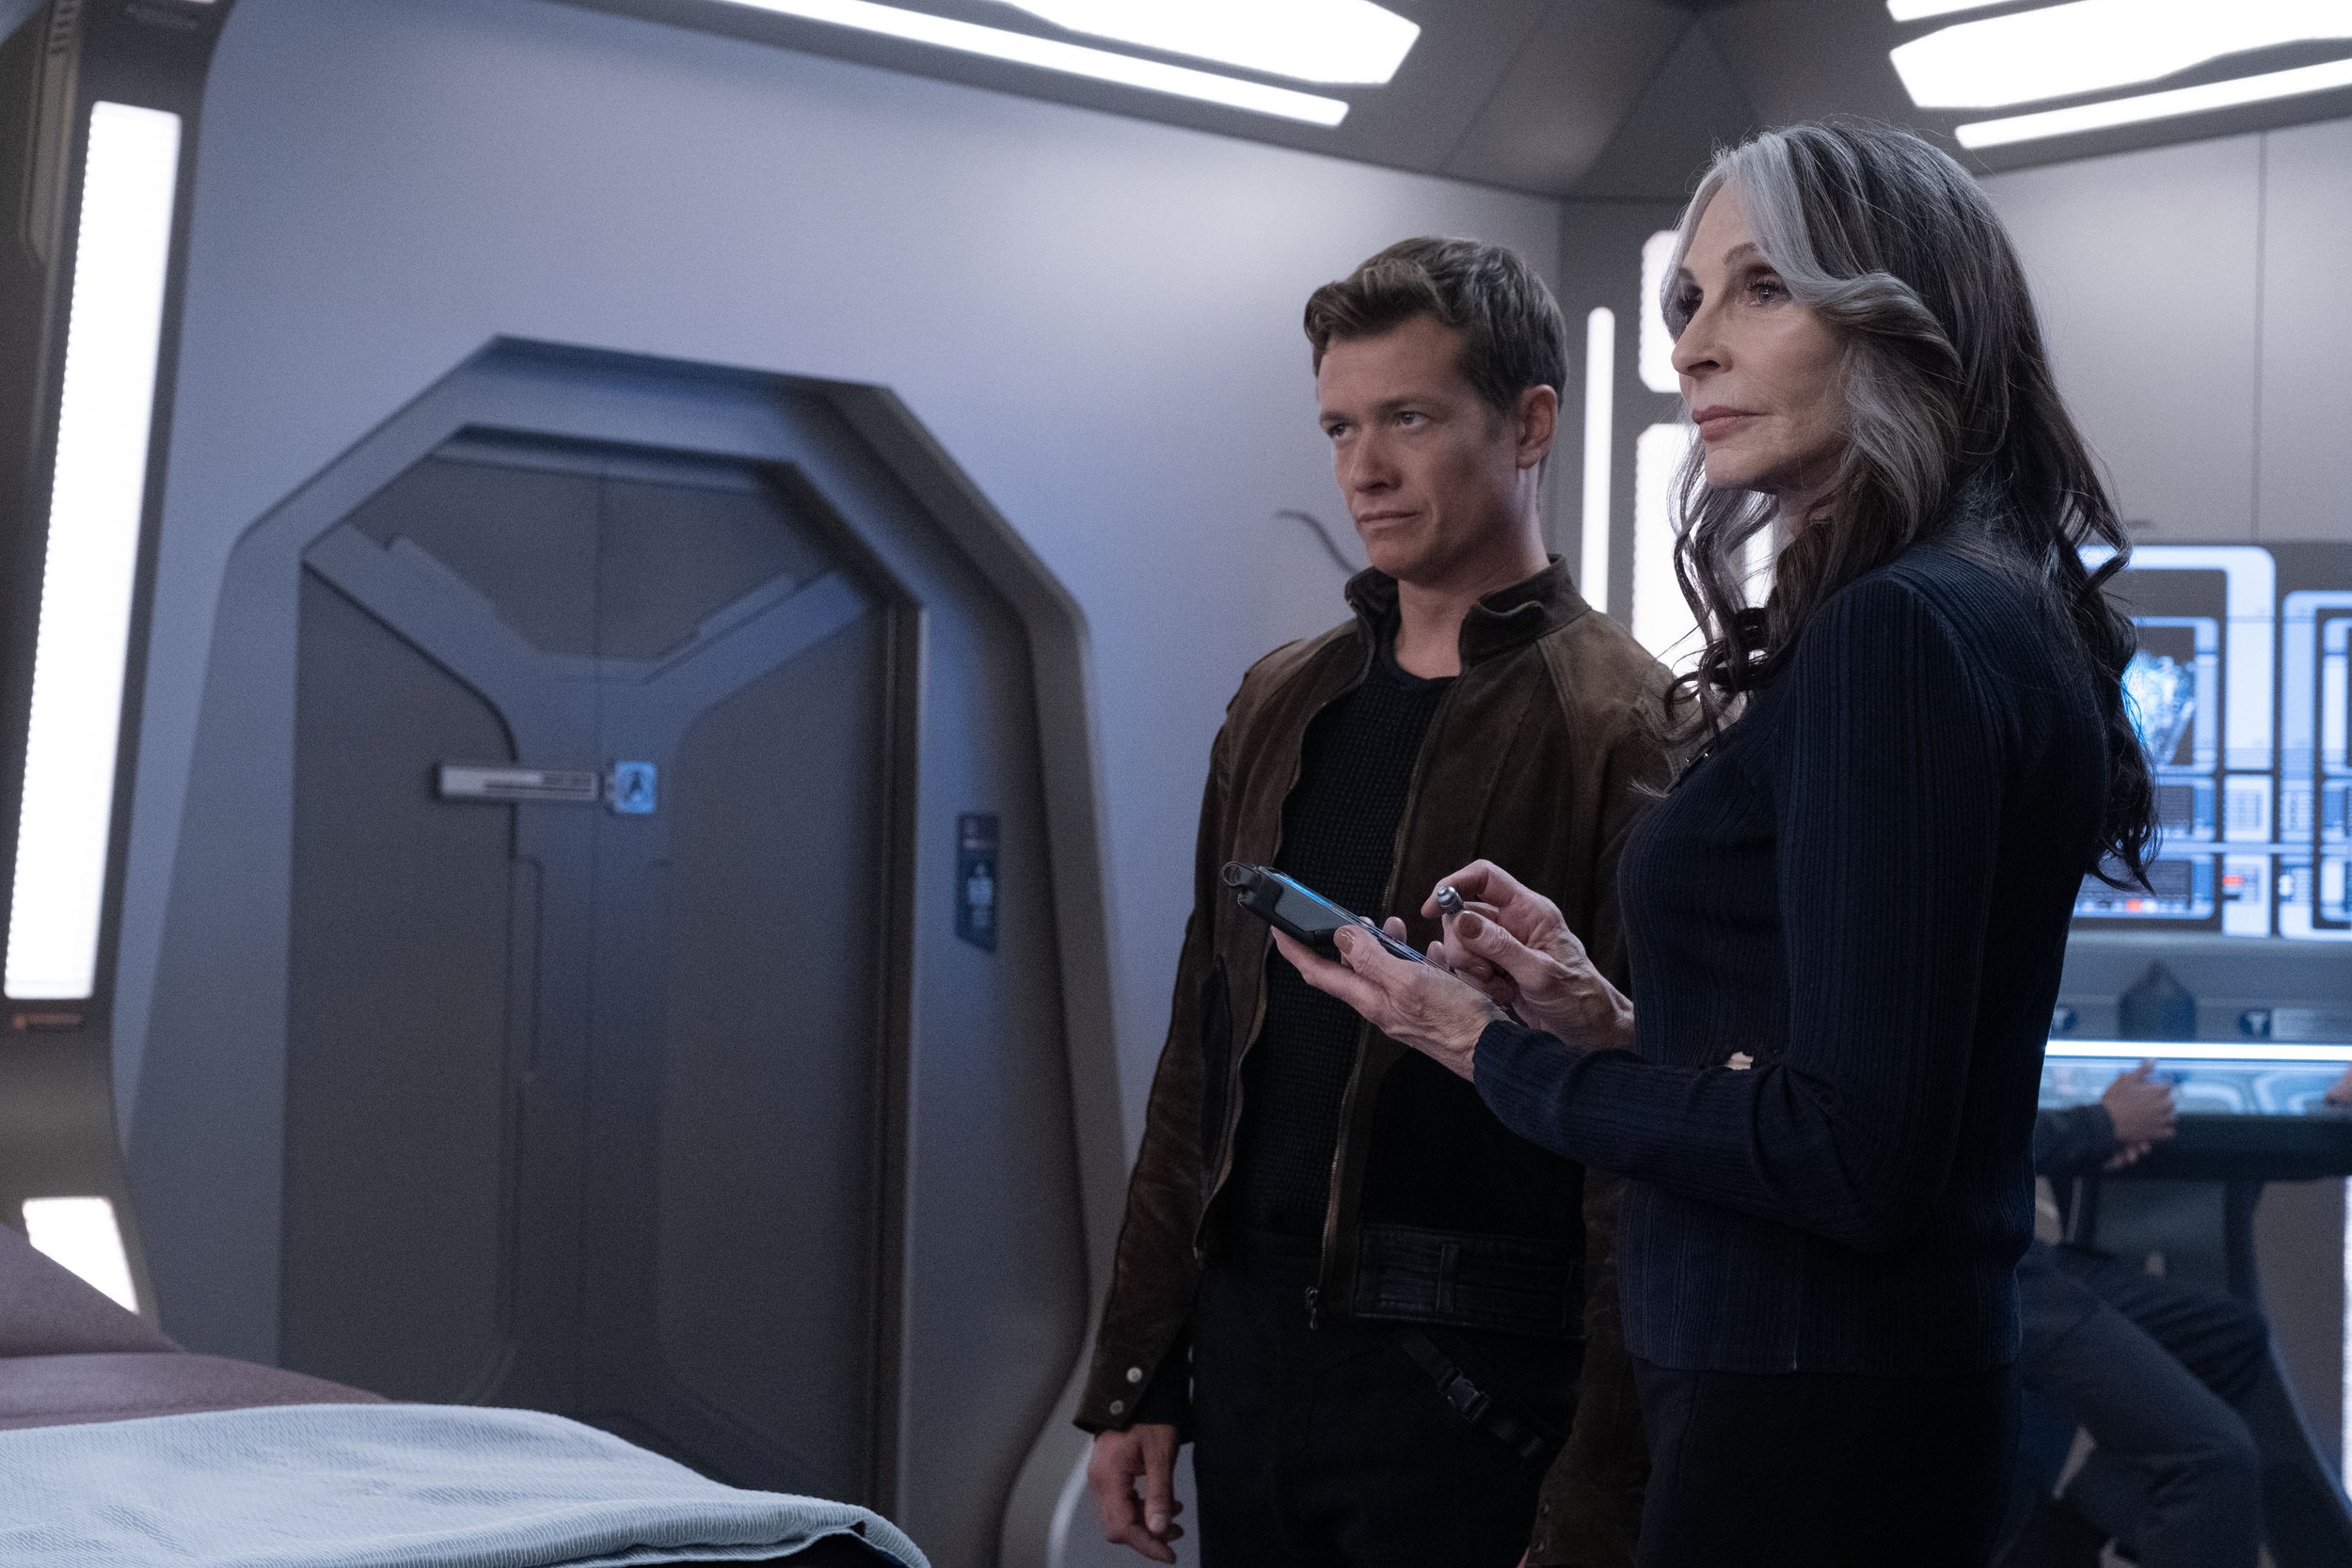   Ed Speleers  as Jack Crusher and  Gates McFadden  as Dr. Beverly Crusher.  Photo Credit: Trae Patton/Paramount+.  